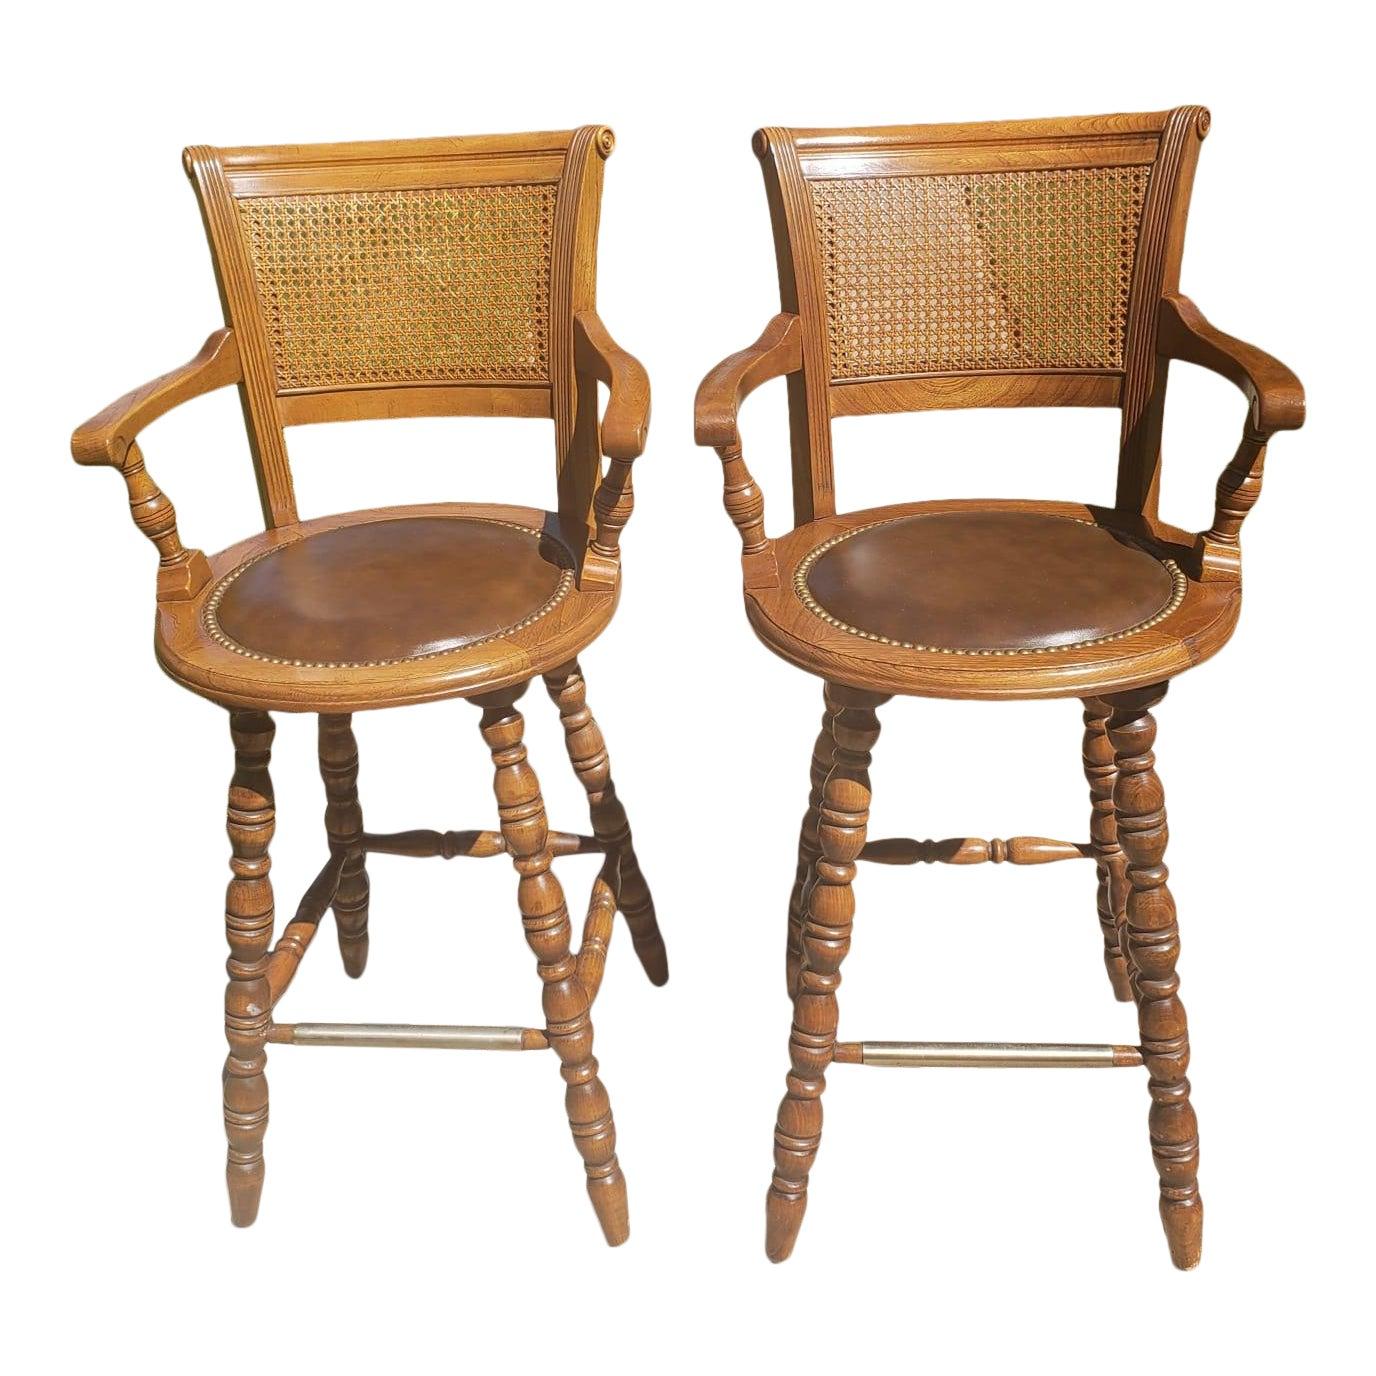 1970s Vintage Full Grain Leather and Caning Swivel Oak Bar Stools, a Pair